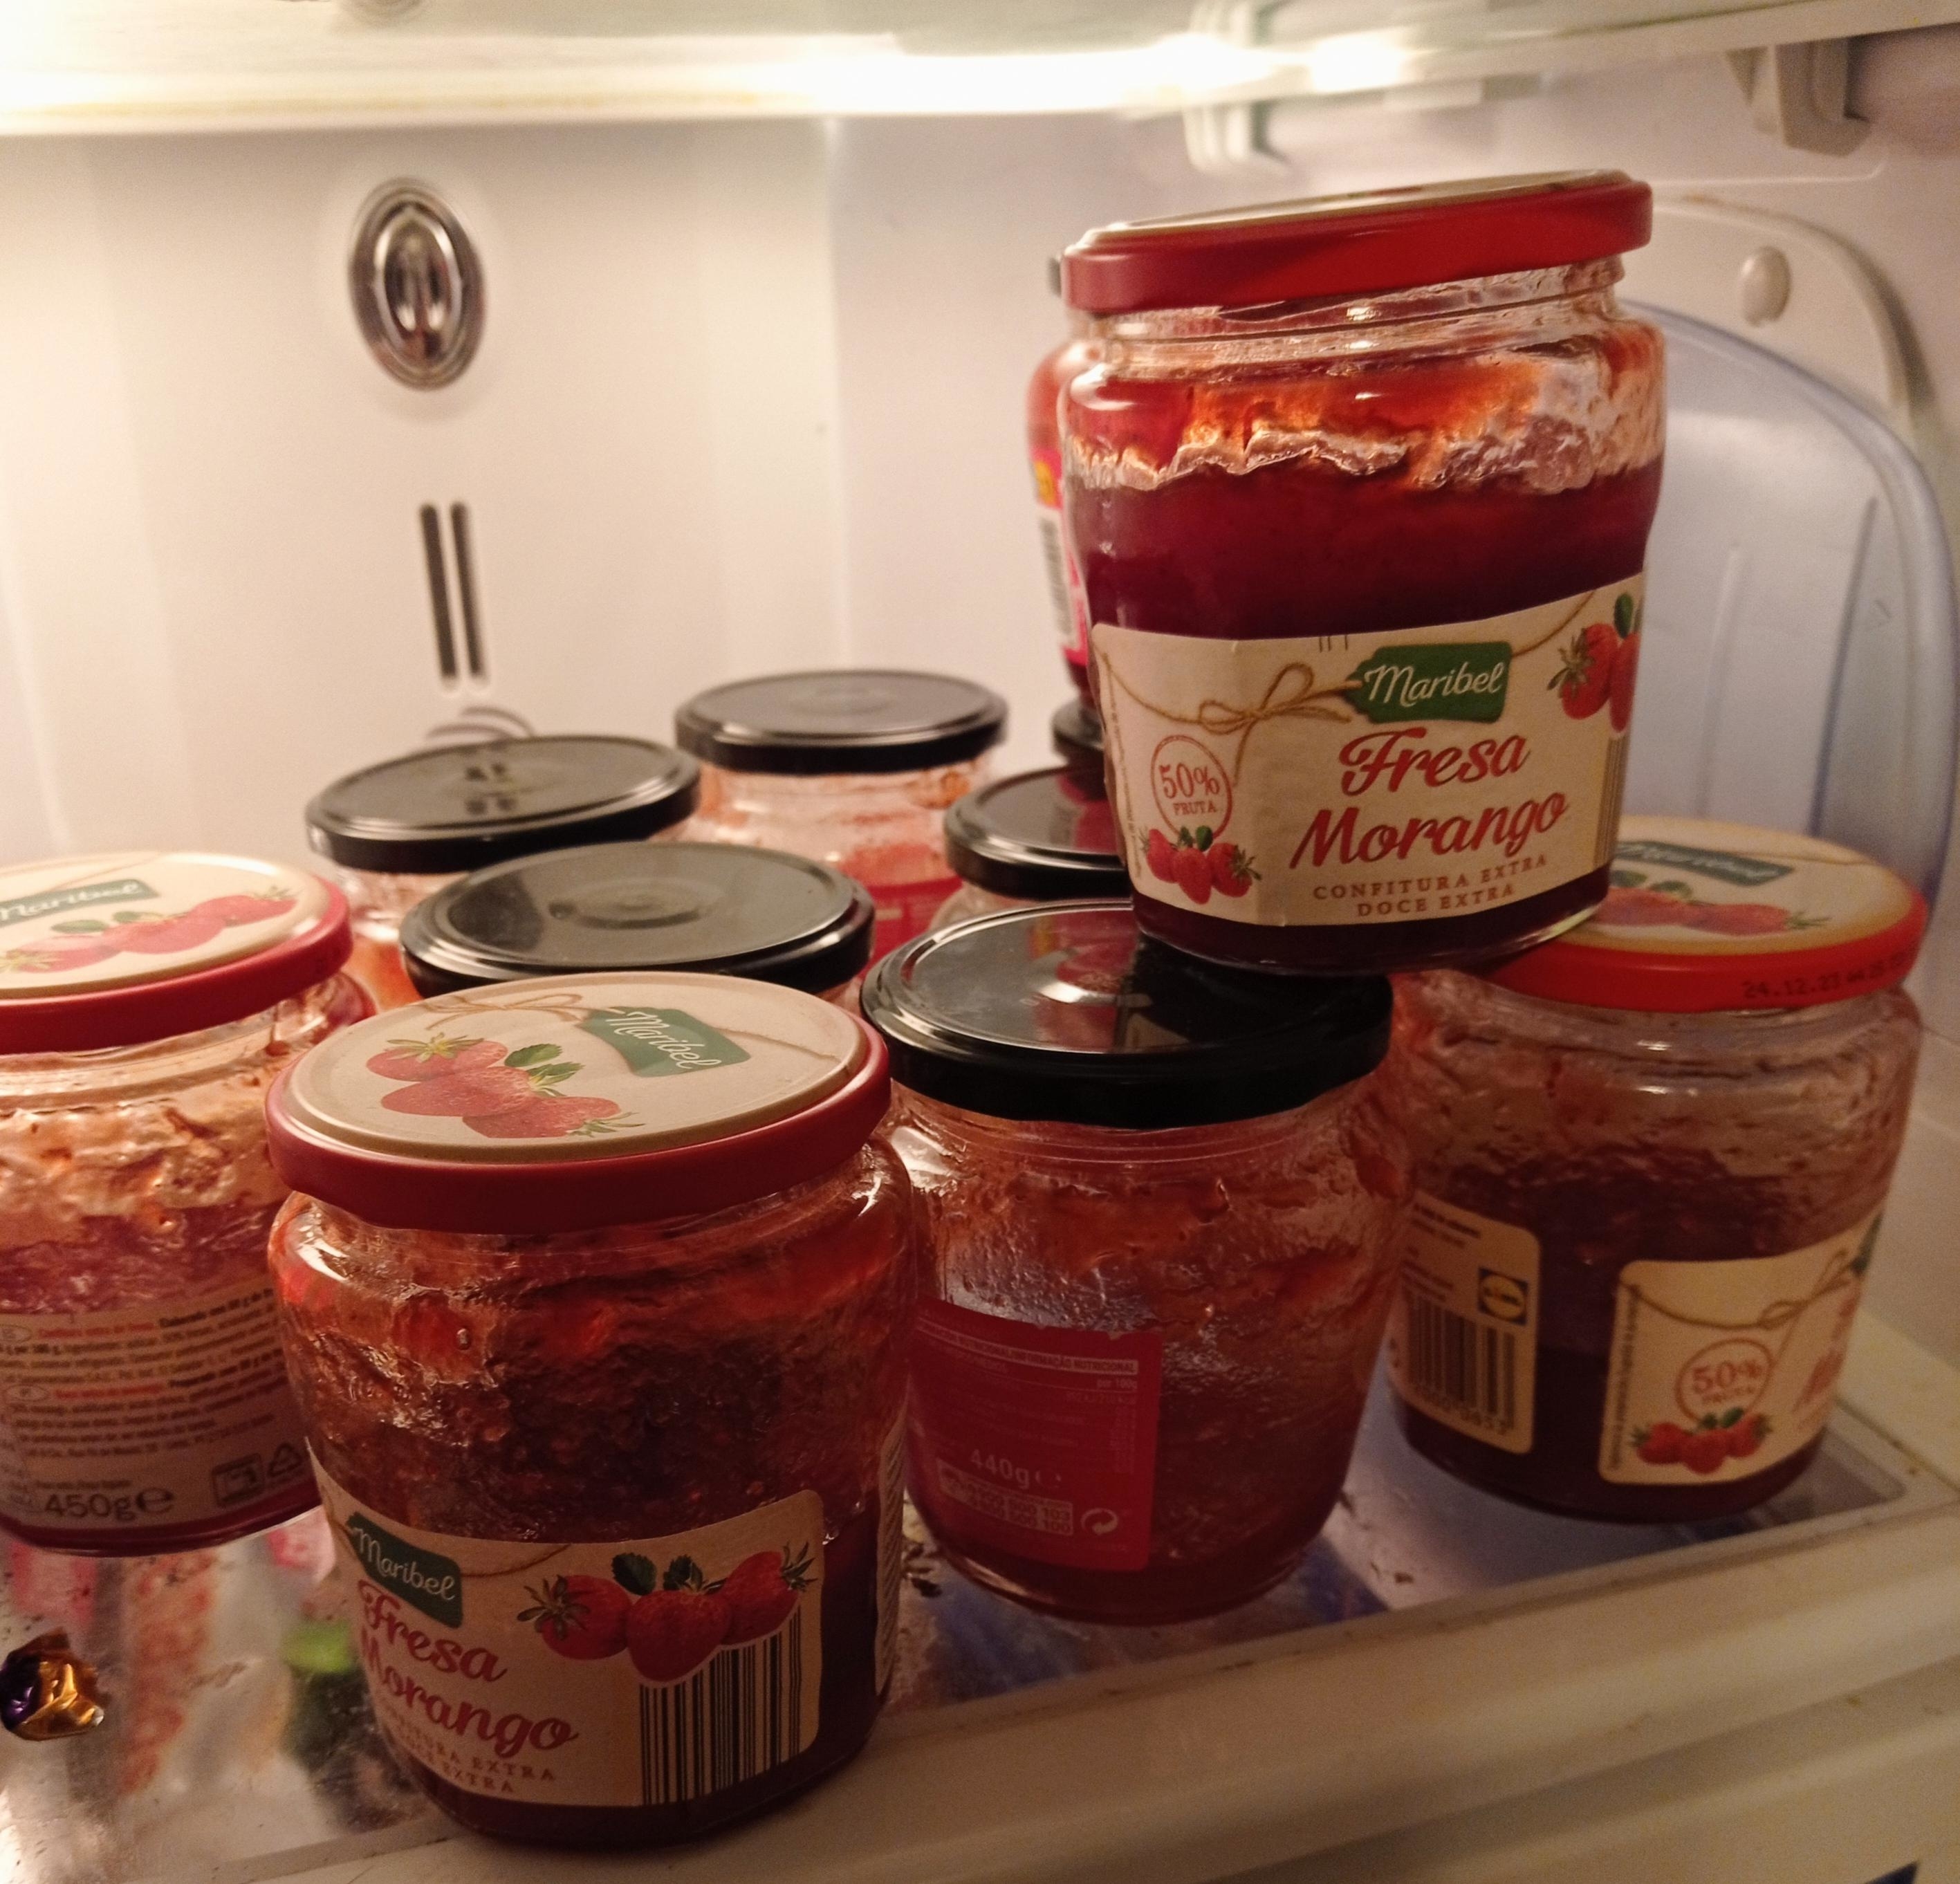 A shelf in the fridge with open jars of strawberry jelly